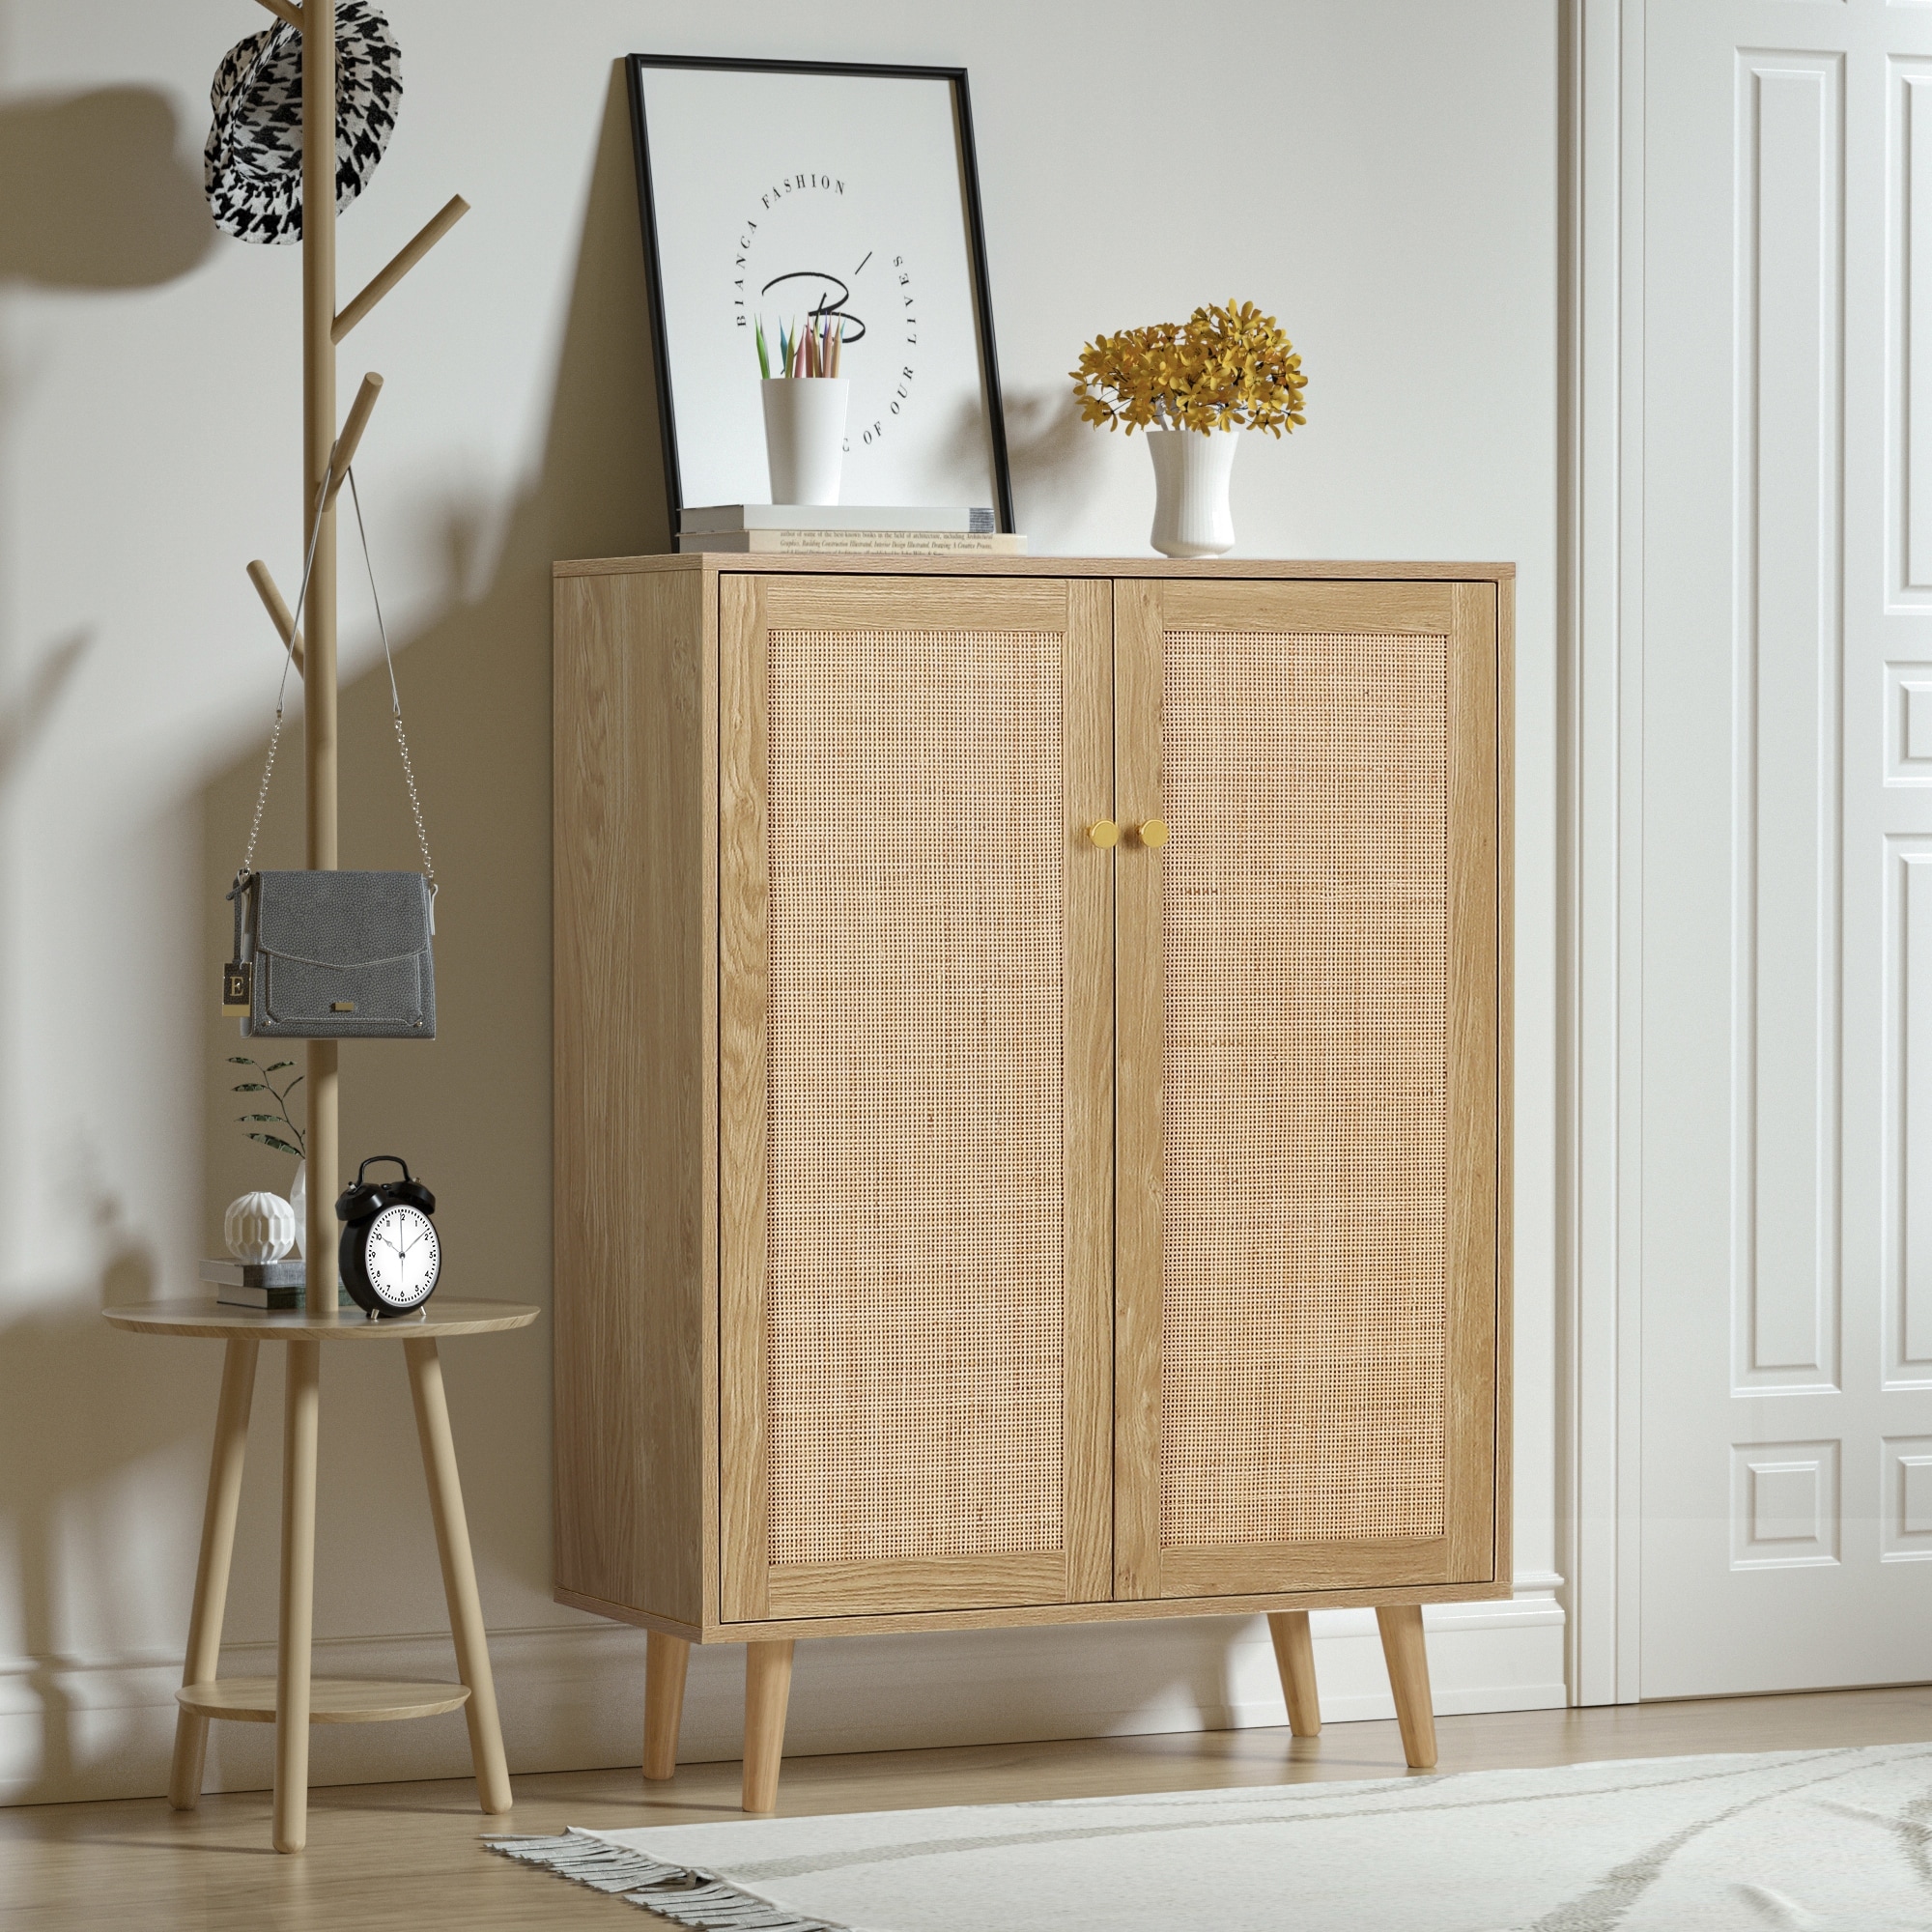 https://ak1.ostkcdn.com/images/products/is/images/direct/6111dae0b074c5d9c7f13cc6d4f01832d9a17a0e/Rattan-Natural-Oak-2-Doors-Accent-Storage-Cabinet-Kitchen-Buffet-Sideboard-Cabinet-for-Entryway-With-Adjustable-Shelf.jpg